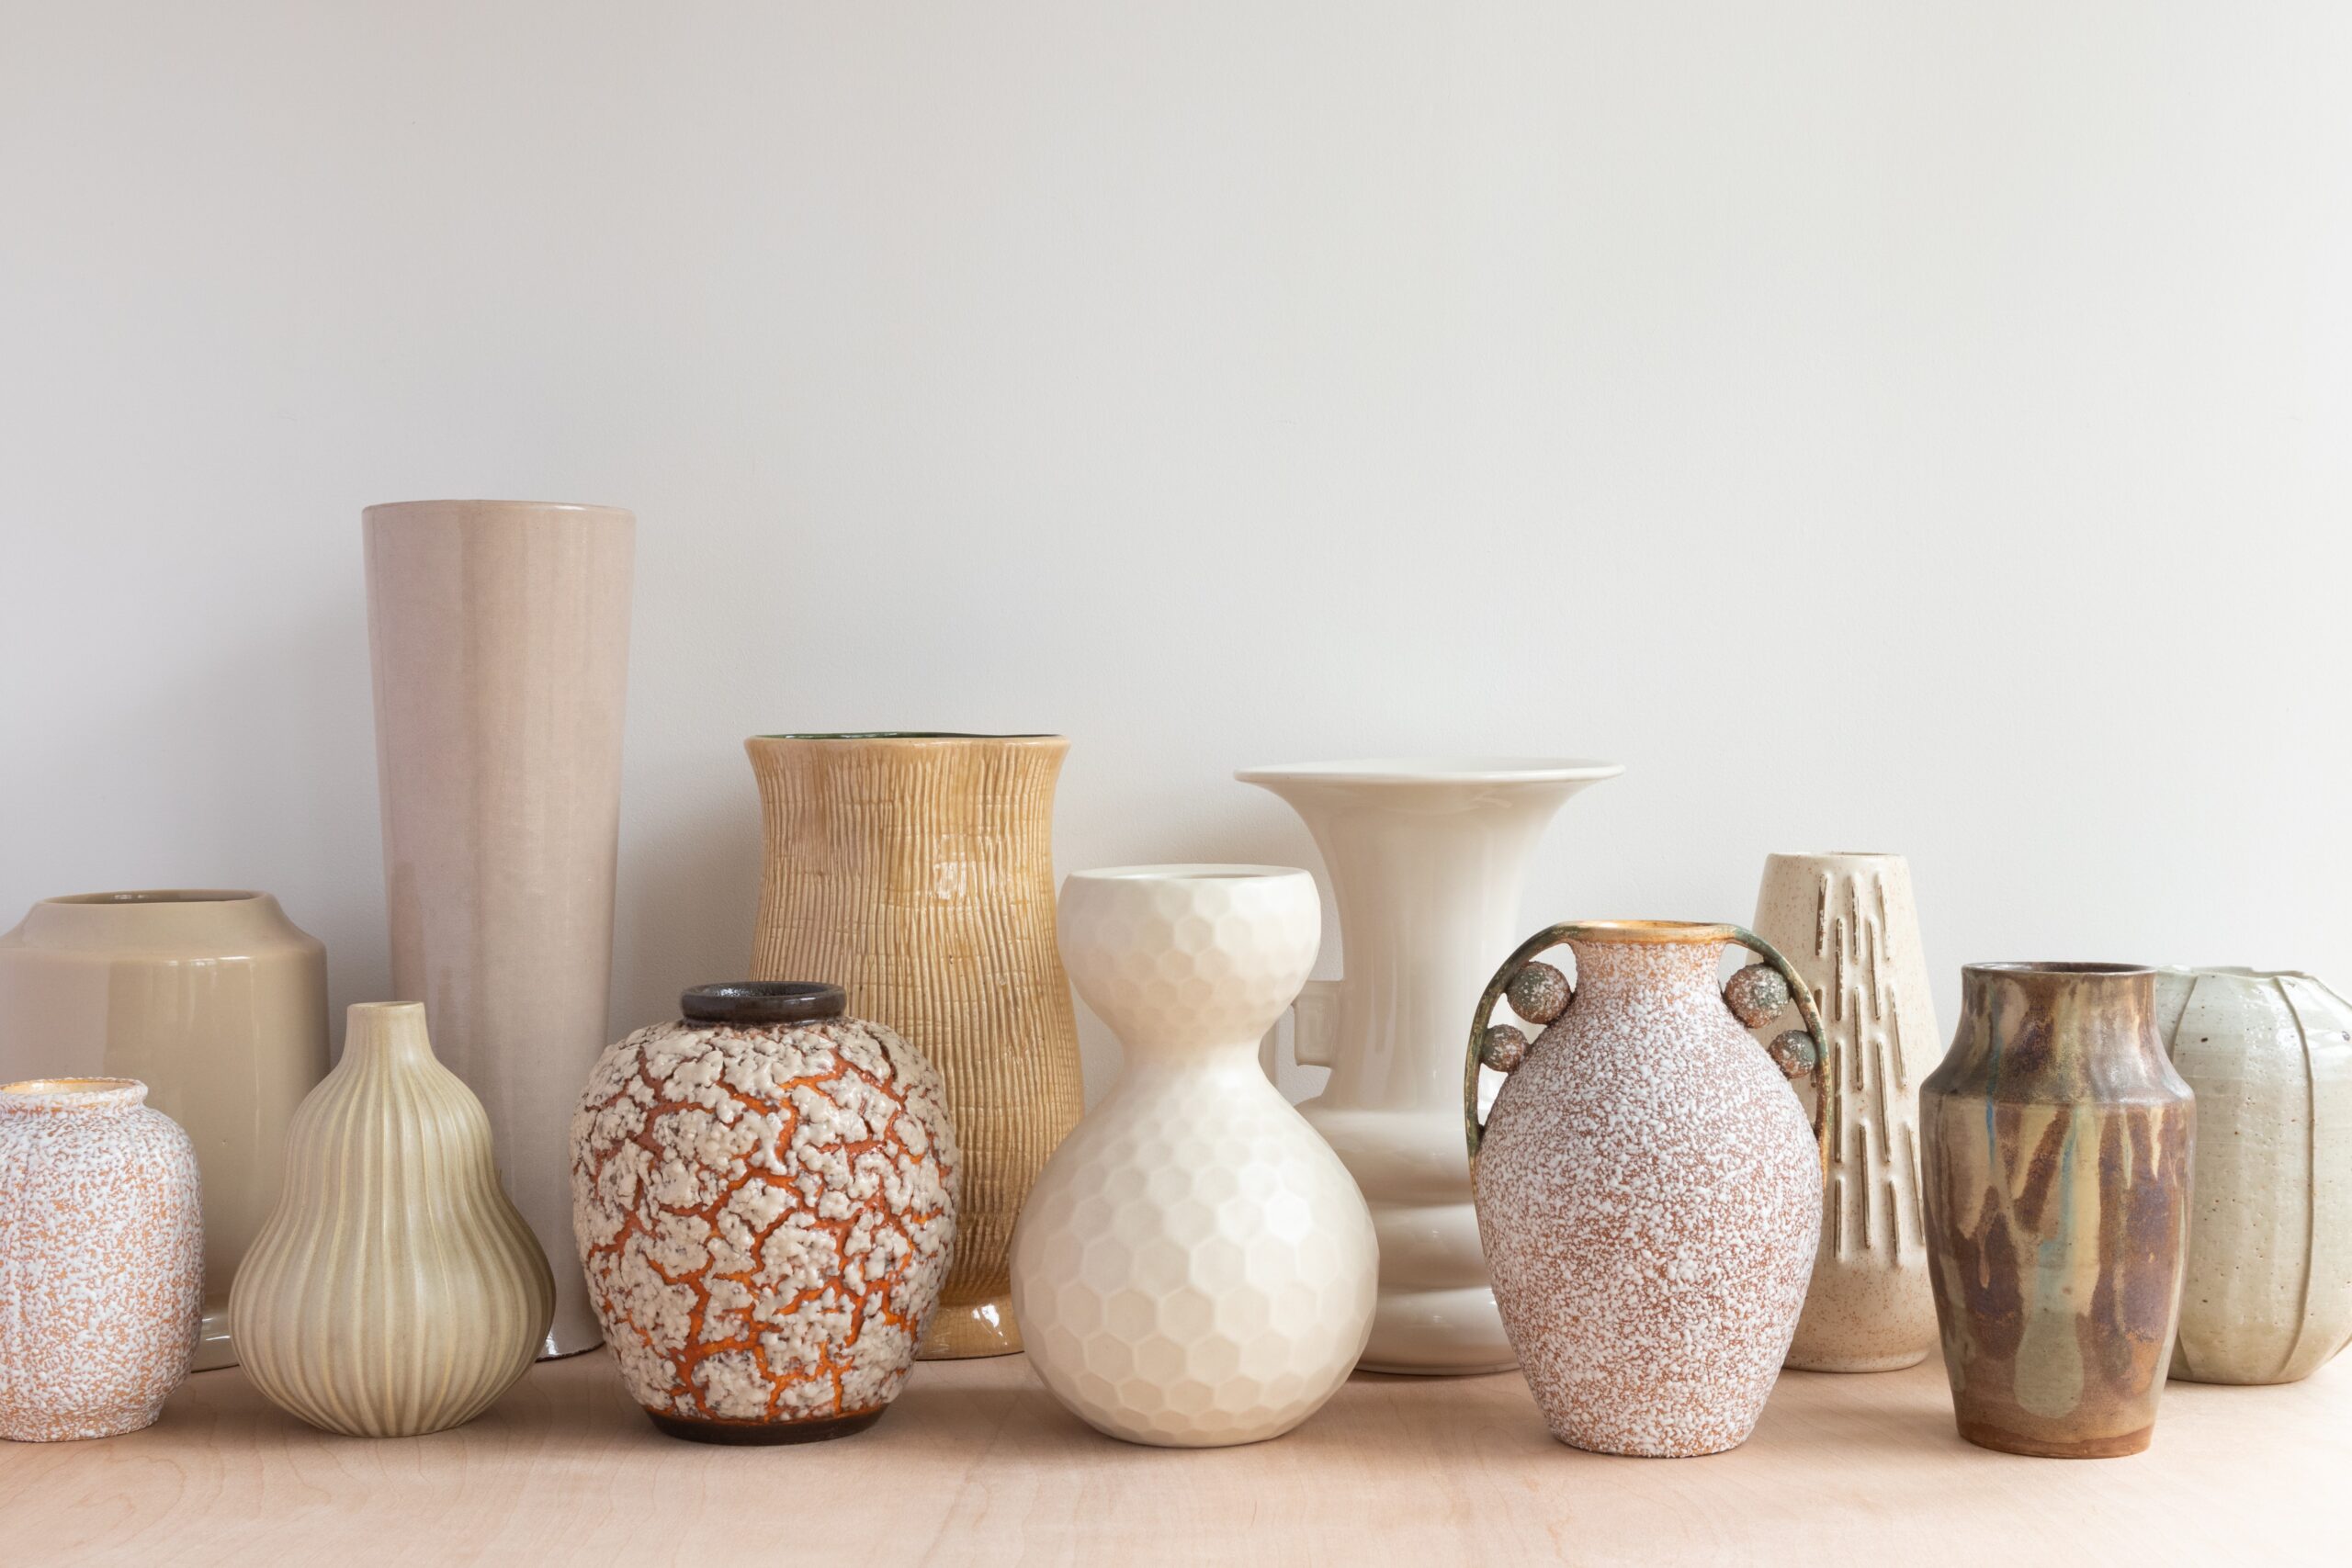 Cultural decor pieces can be a great way to utilize the boho aesthetic while celebrating other cultures and parts of the world. Pictured: Vases on a shelf.